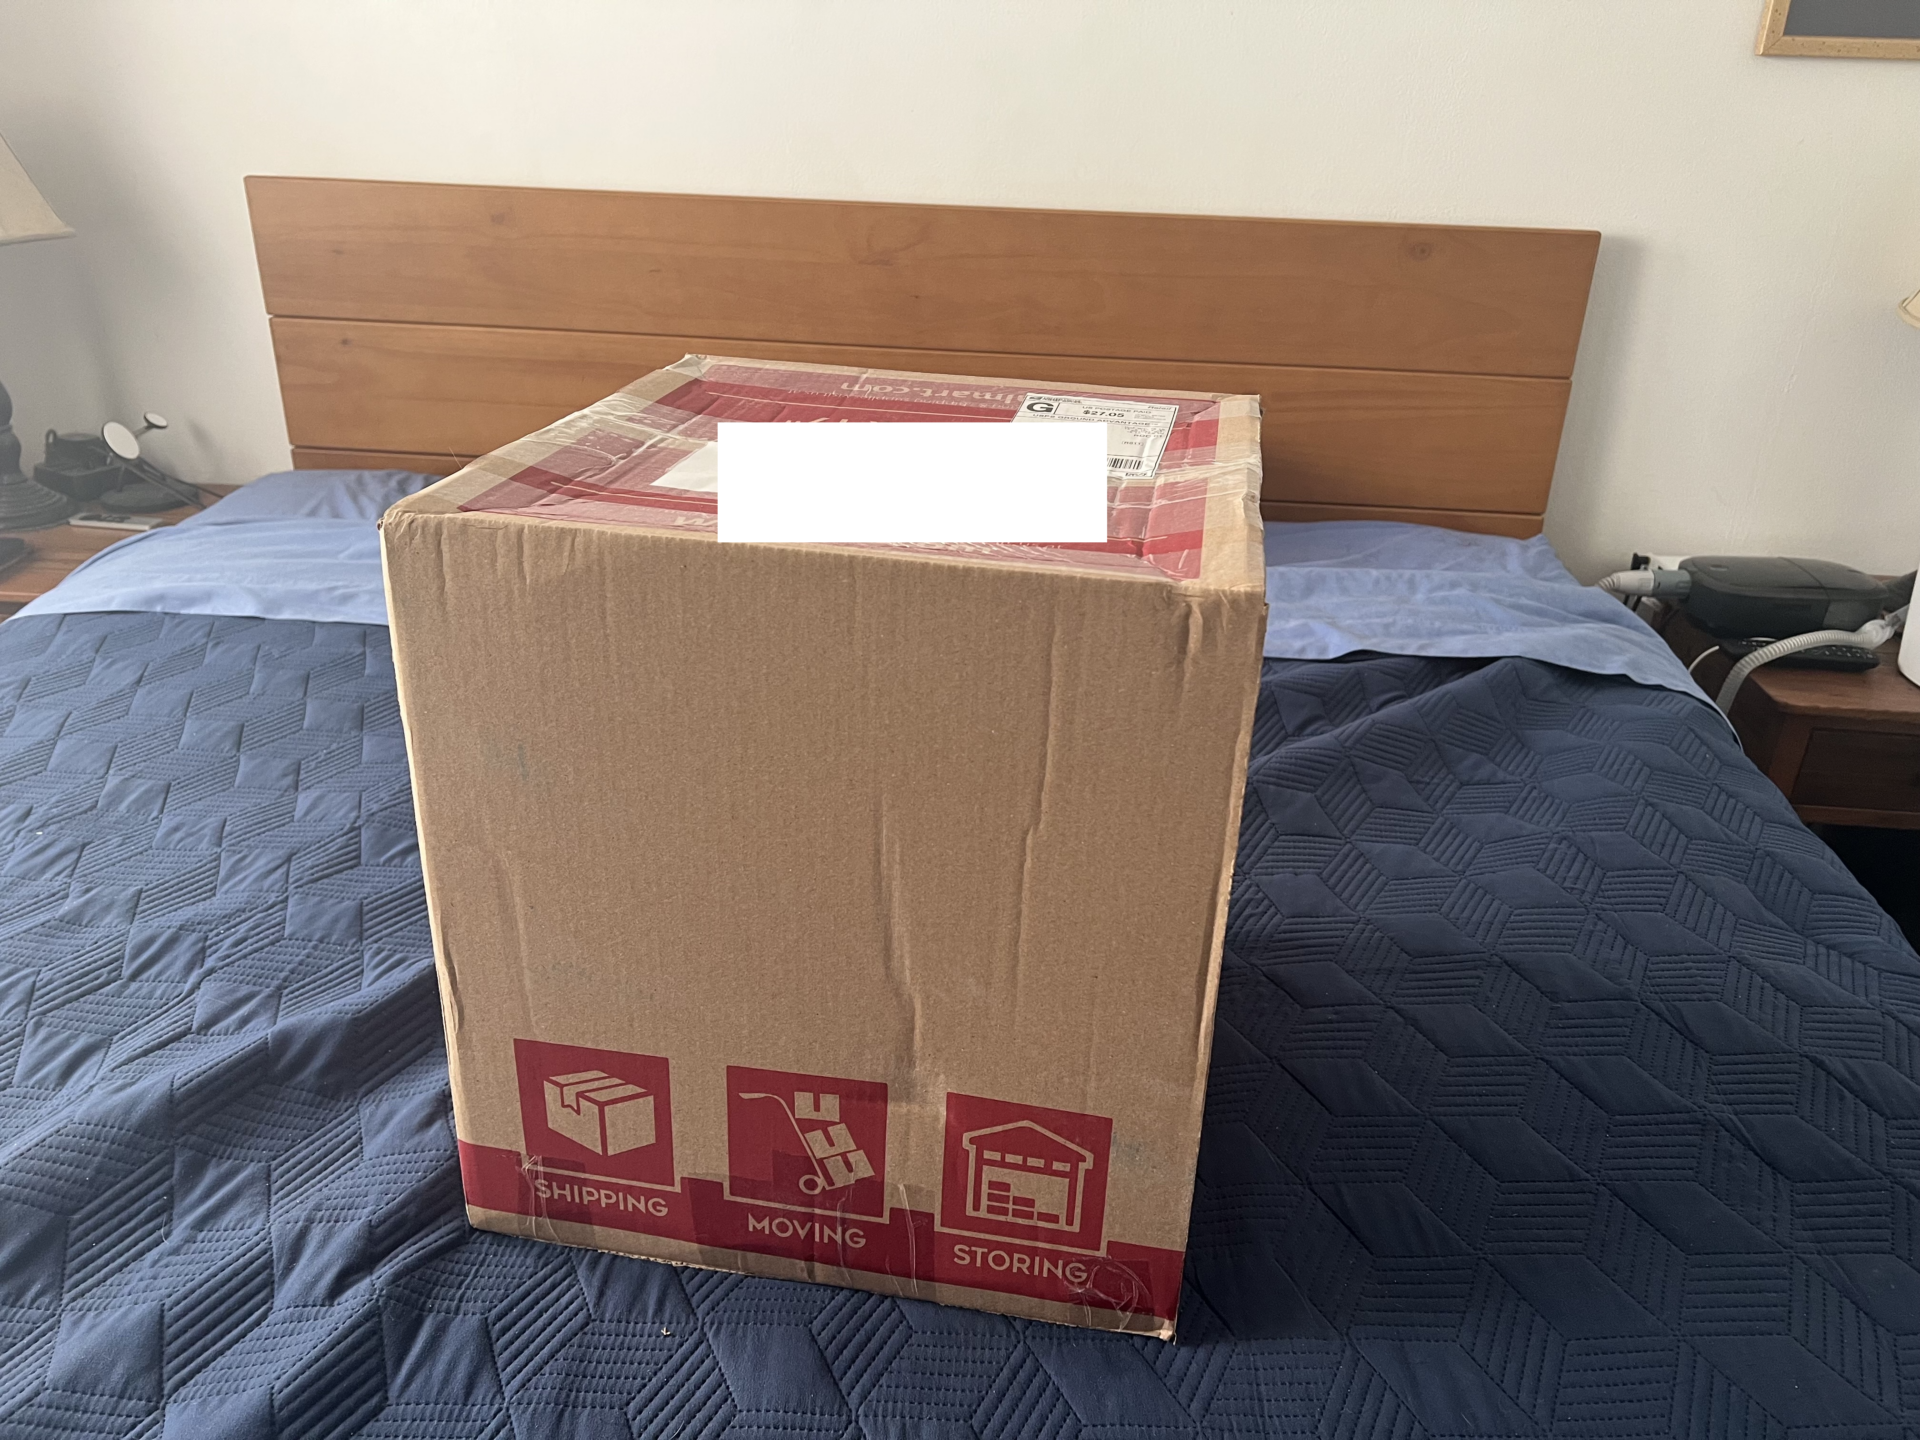 A cube shaped box sitting on a bed.